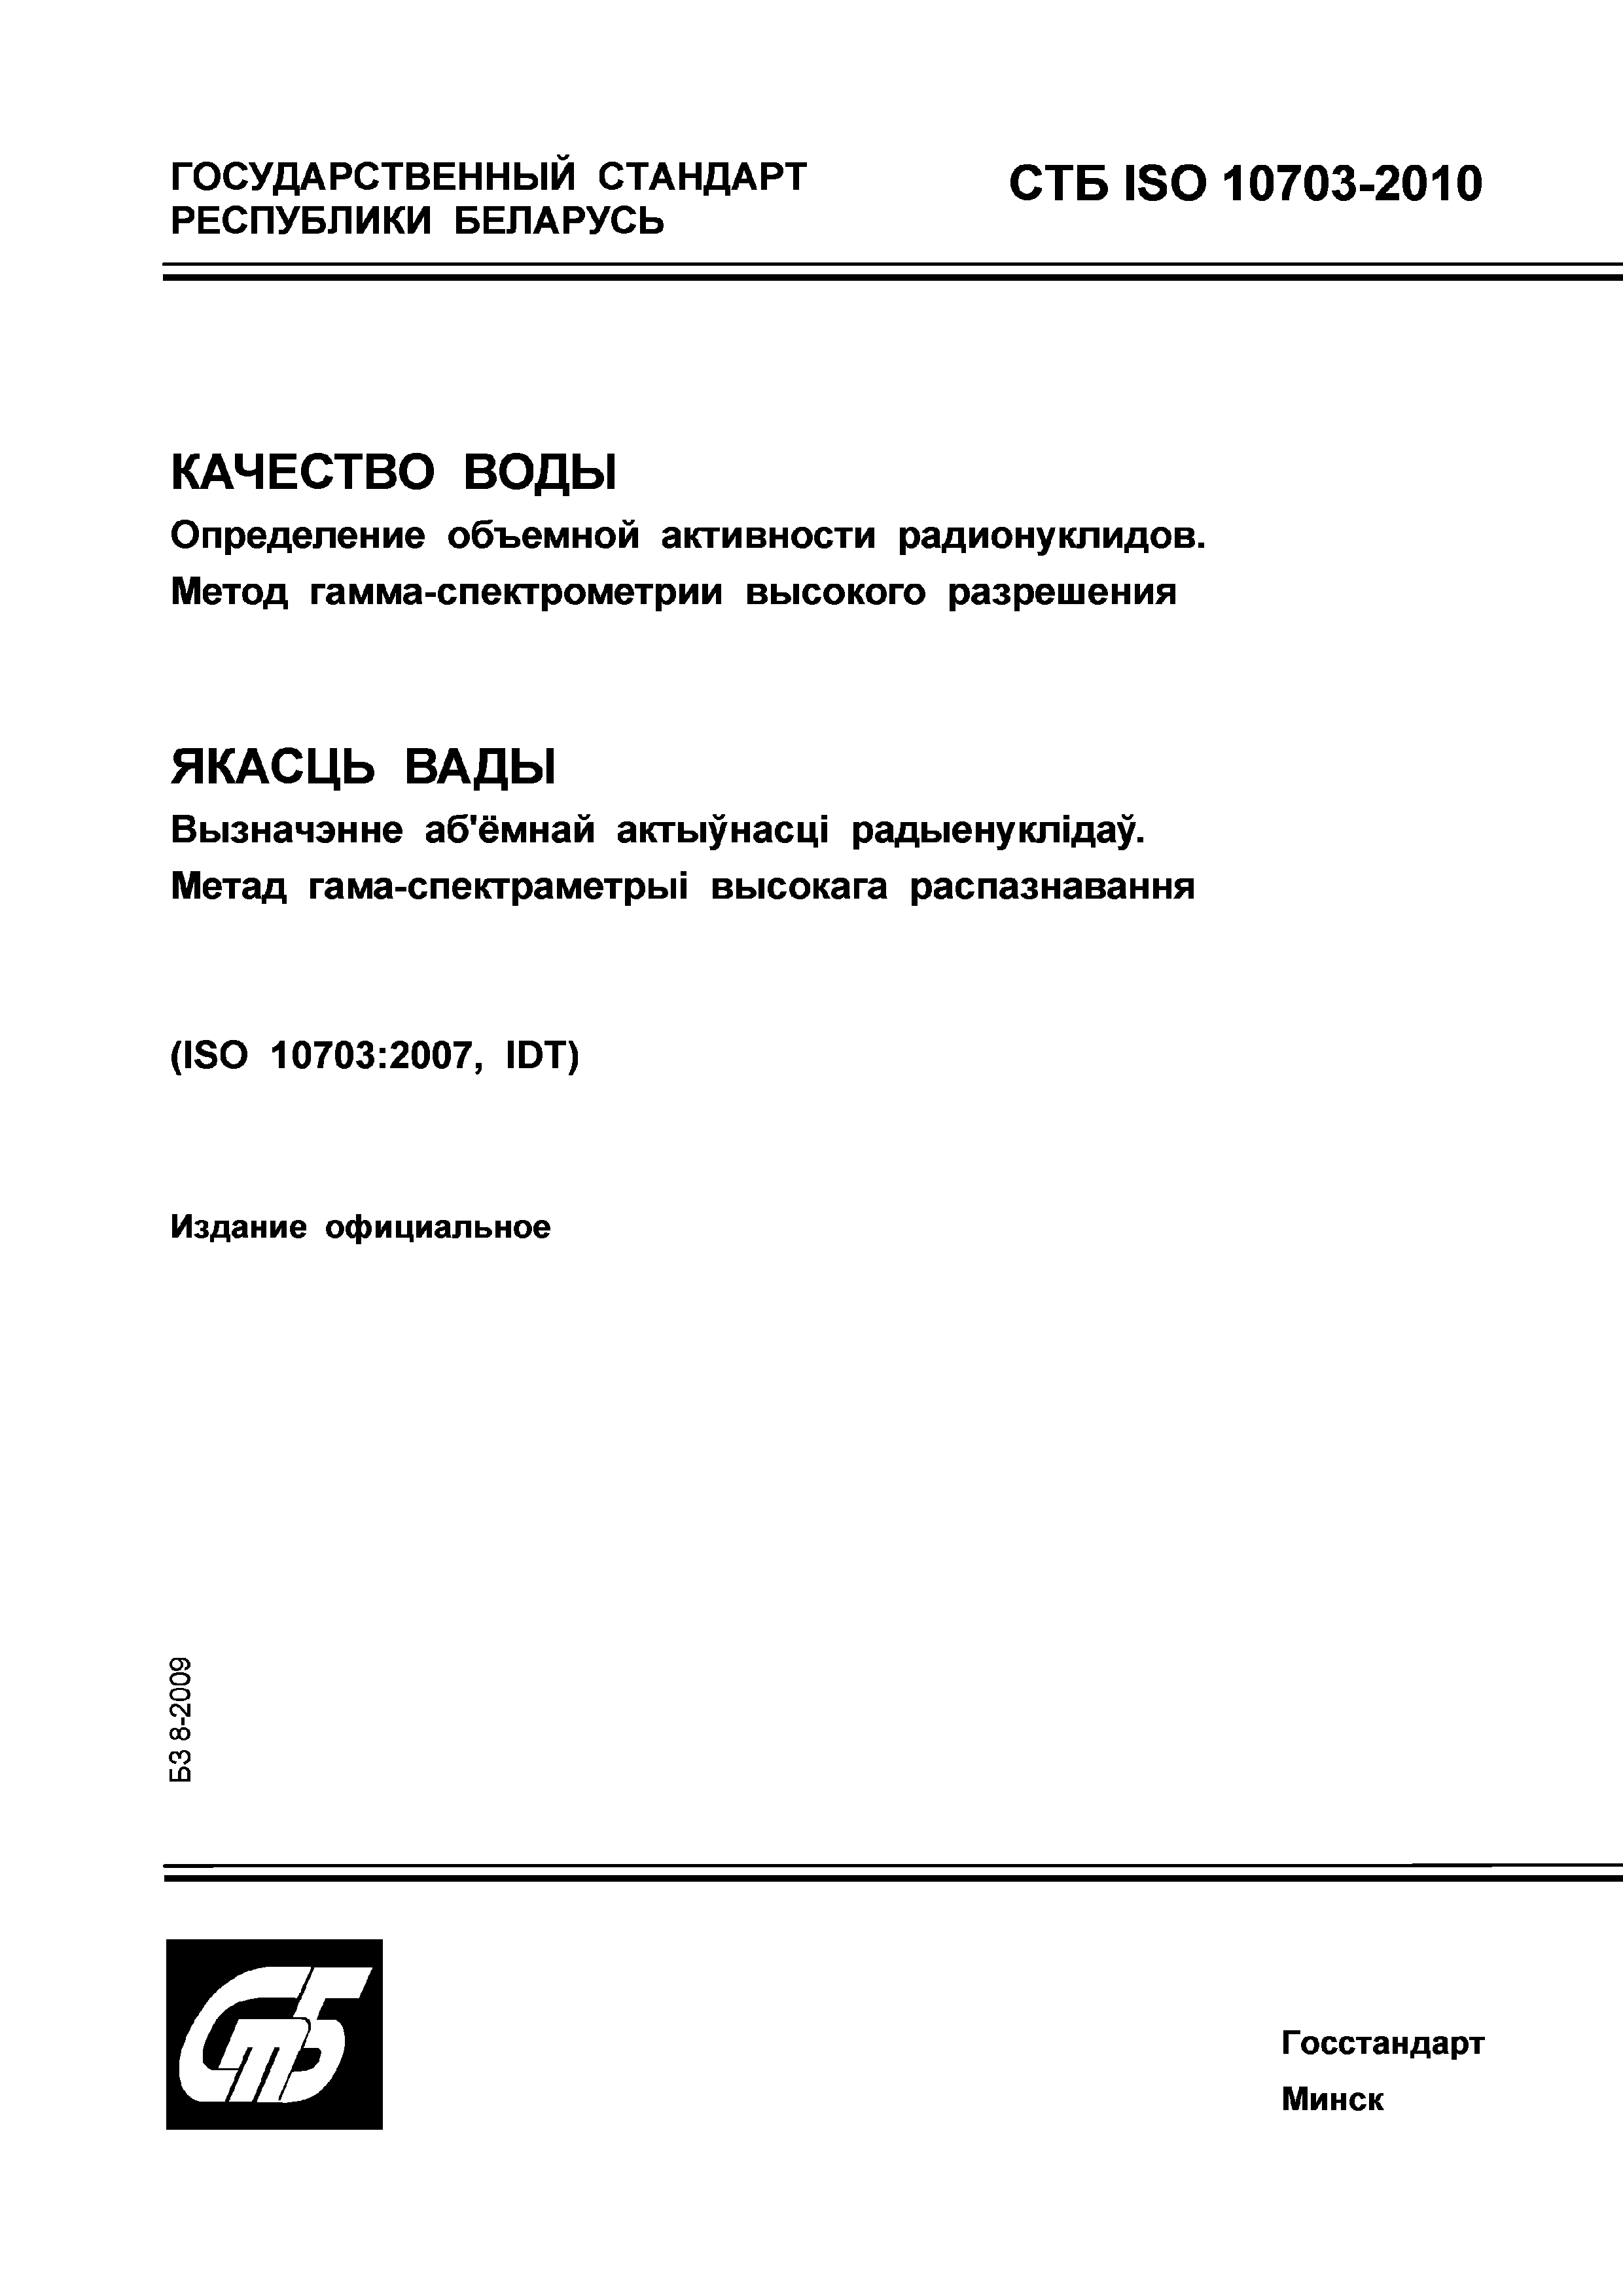 СТБ ISO 10703-2010